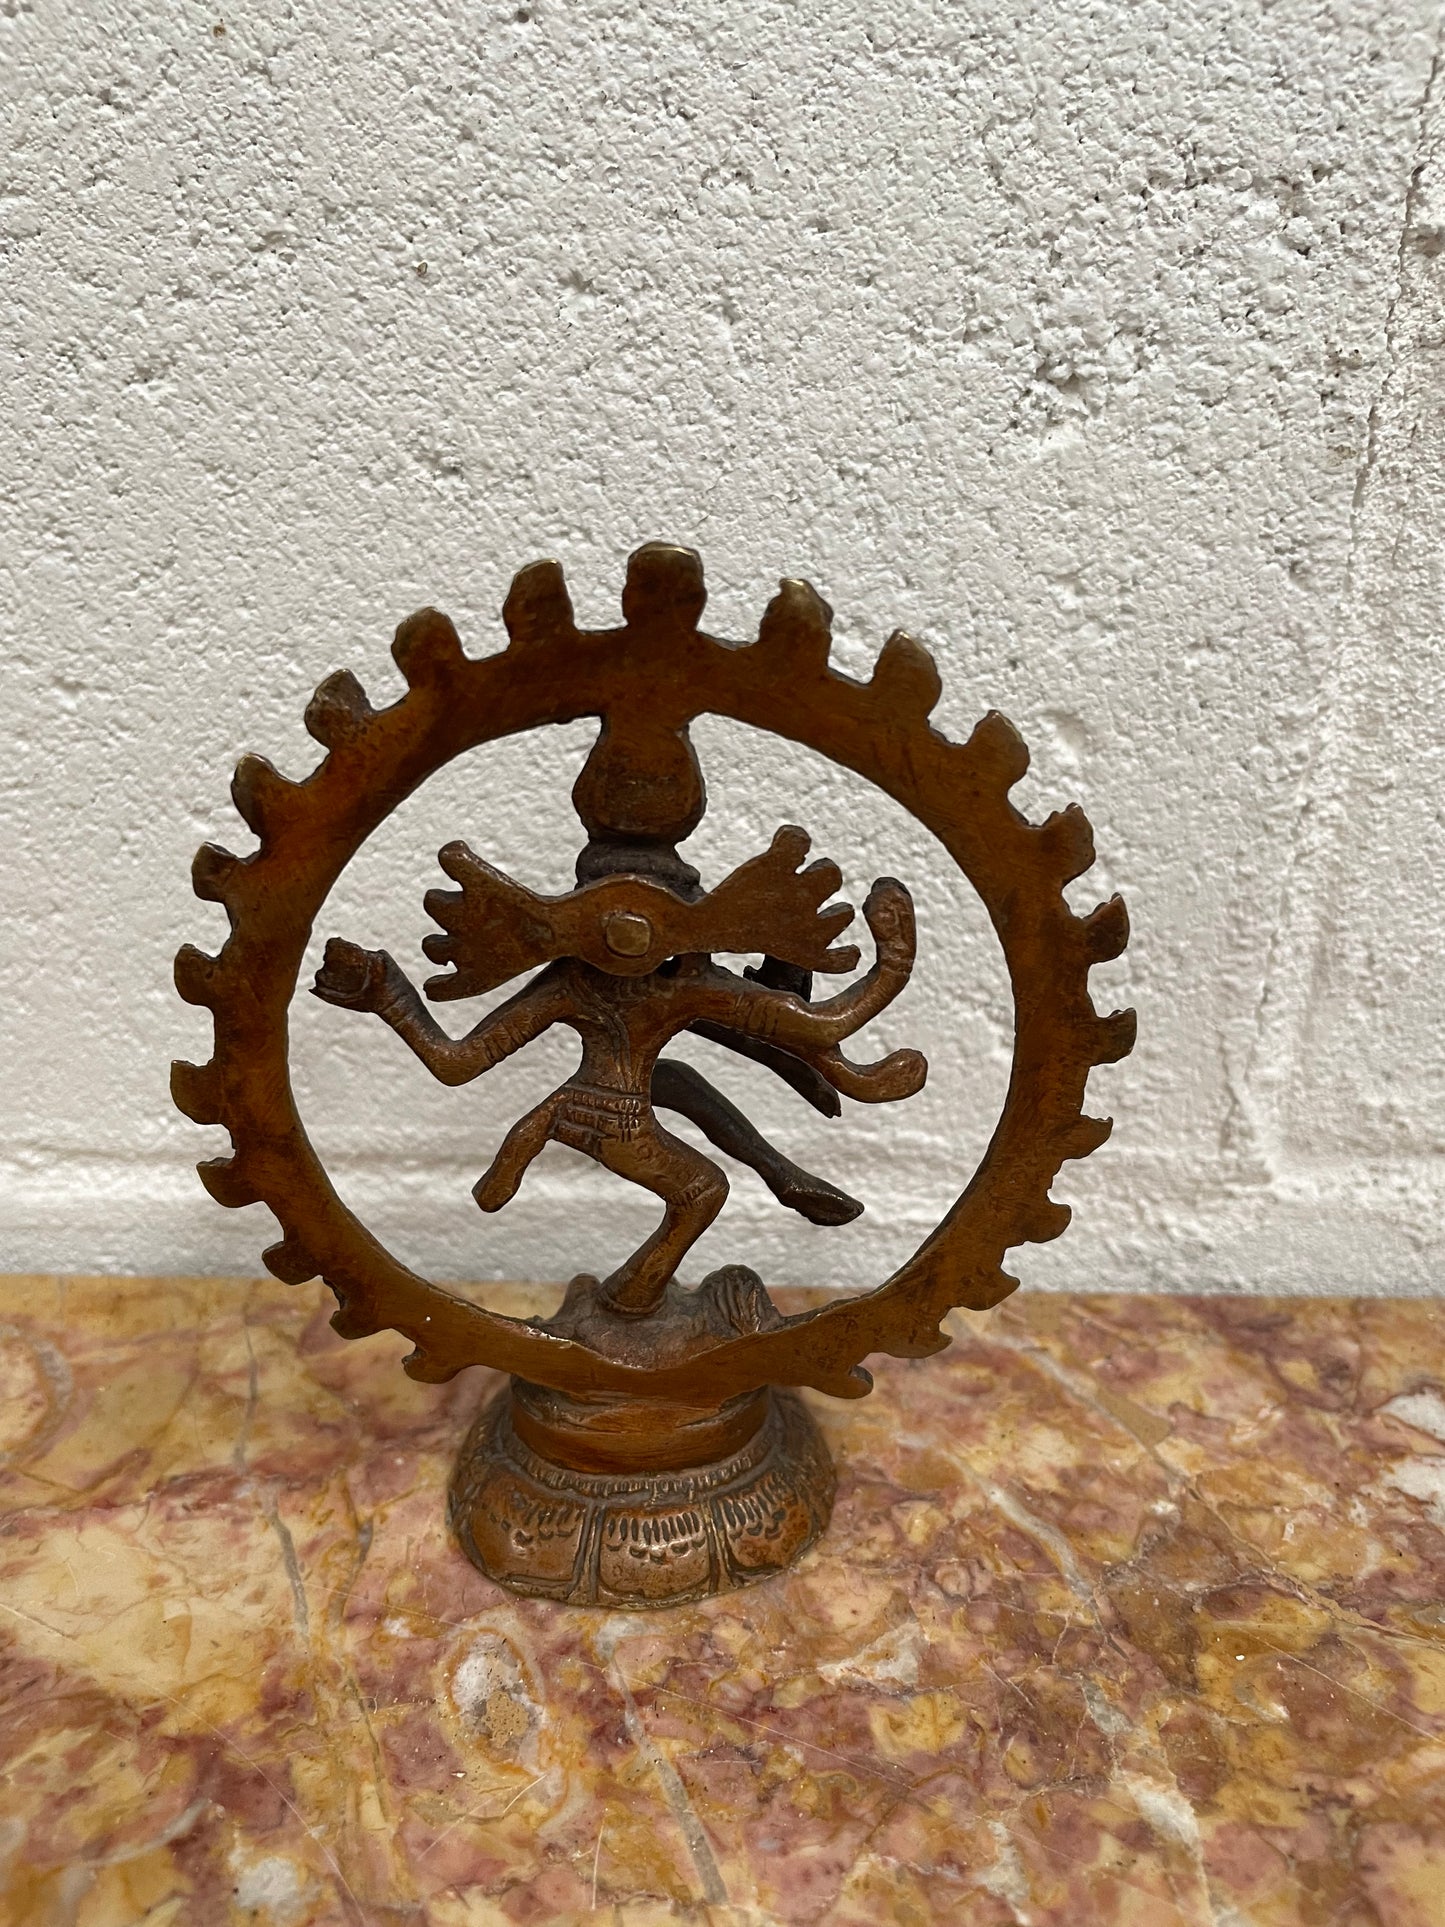 Vintage Dancing Shiva statue made of bronze. Sourced locally and in good original condition.